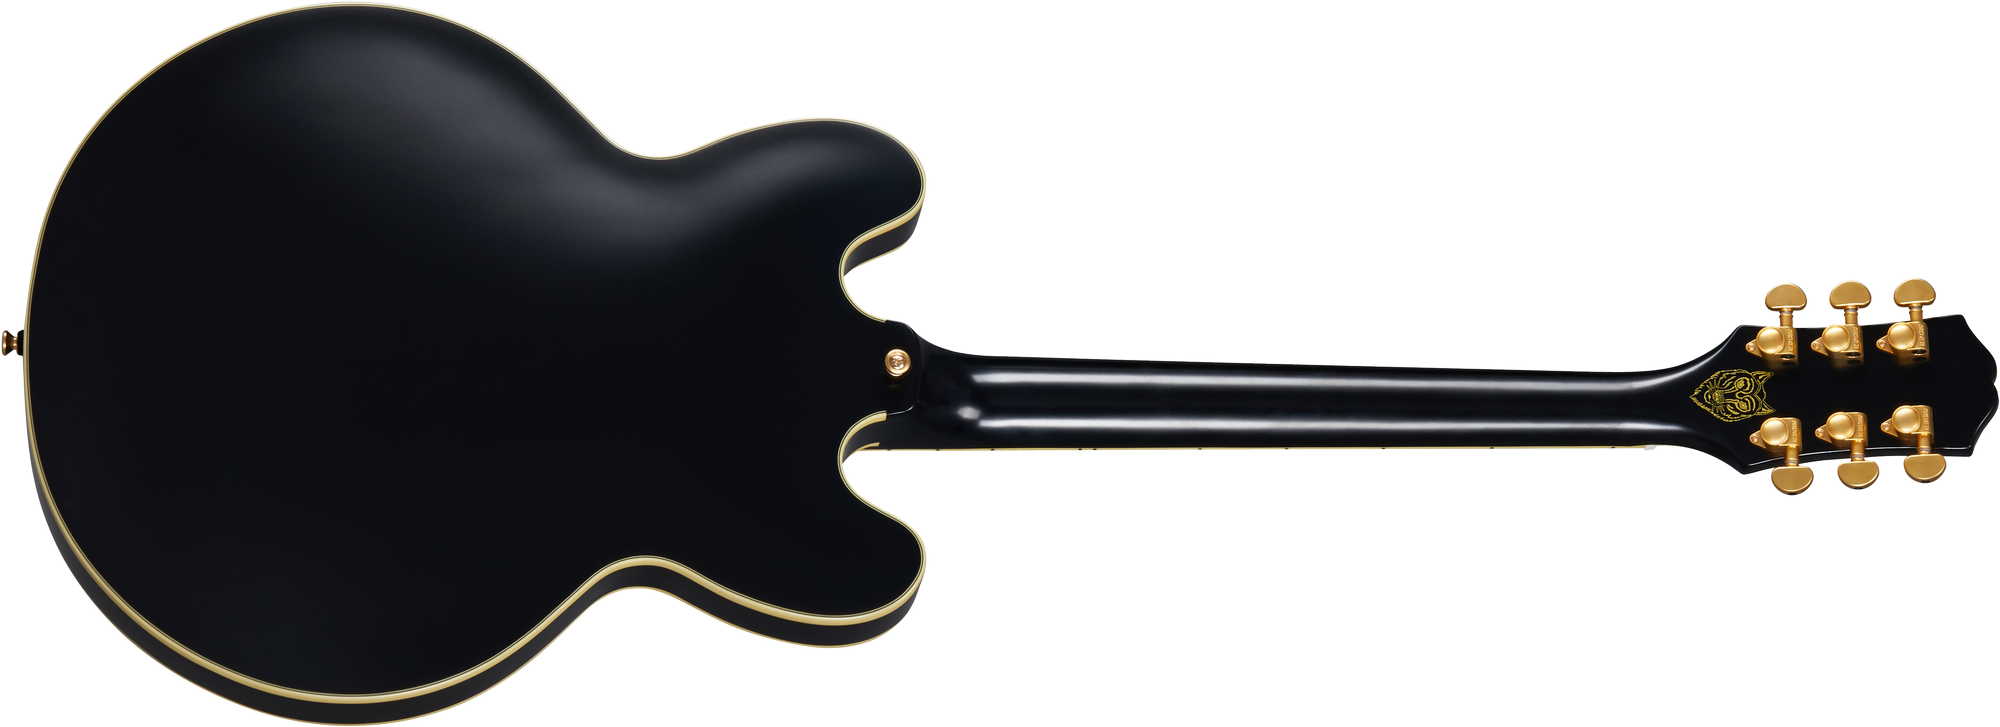 Epiphone Emily Wolfe Sheraton Stealth Black Aged Gloss El-Guitar